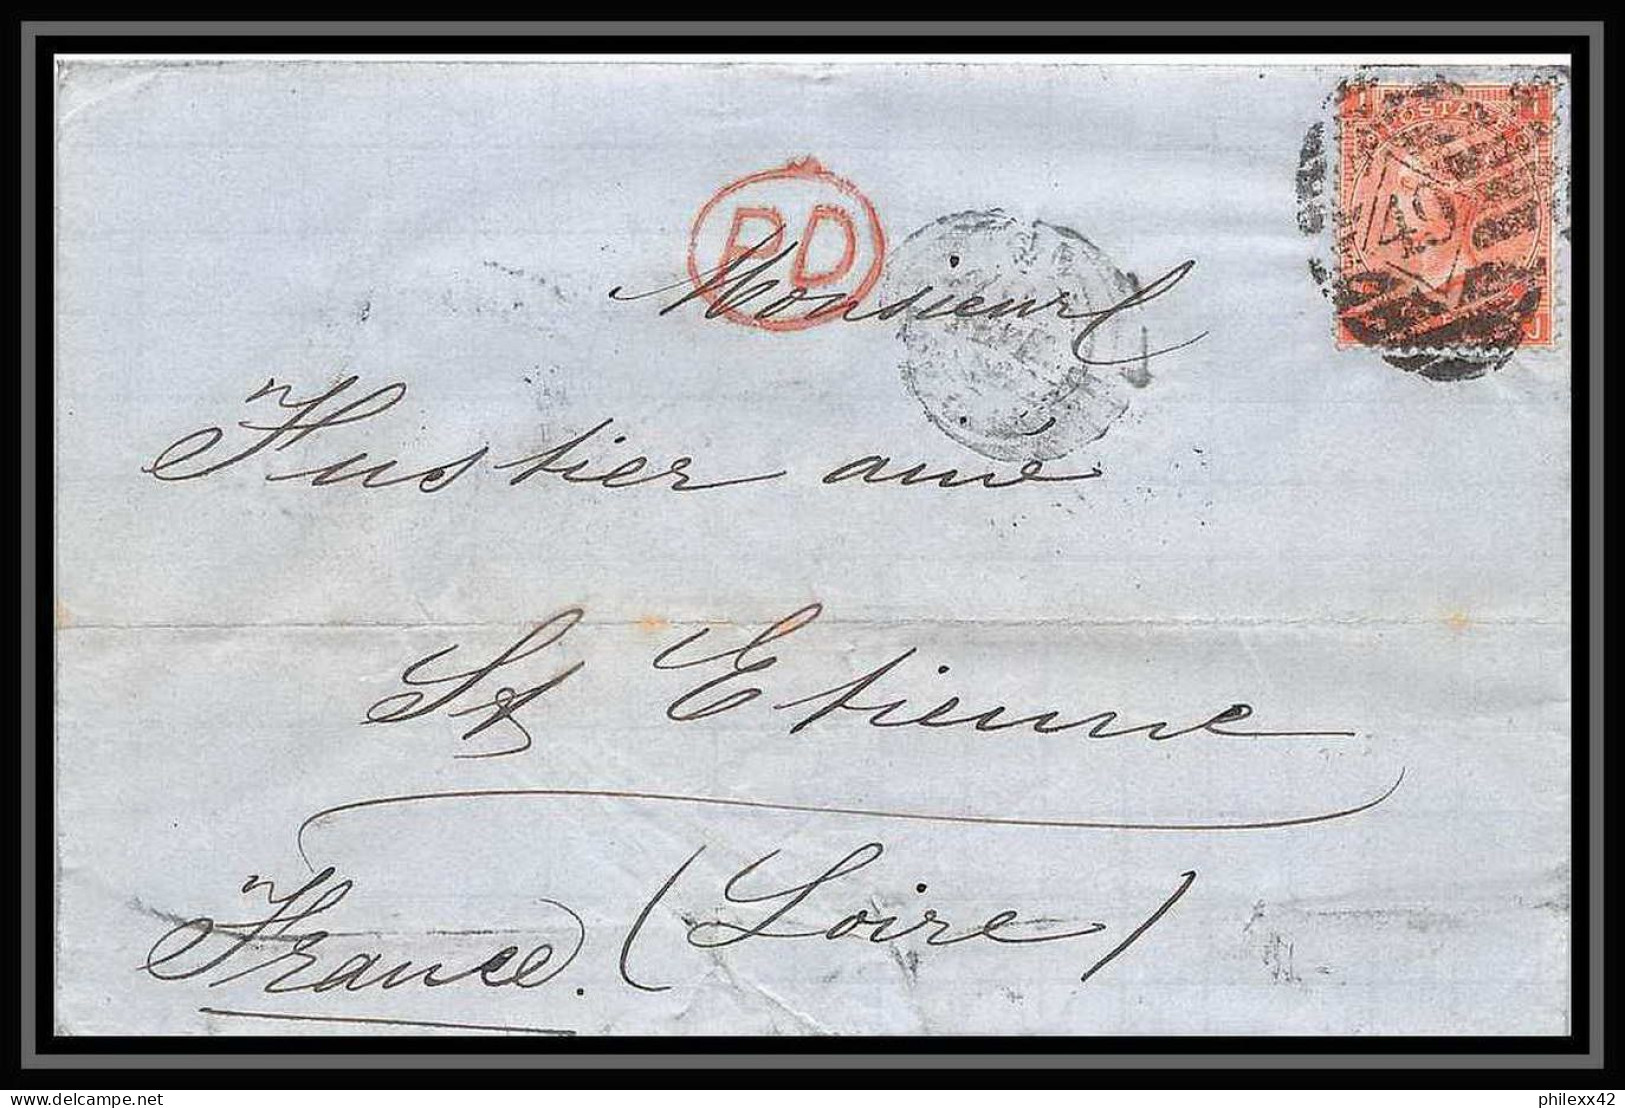 35682 N°32 Victoria 4p Red London St Etienne France 1868 Cachet 49 Lettre Cover Grande Bretagne England - Covers & Documents